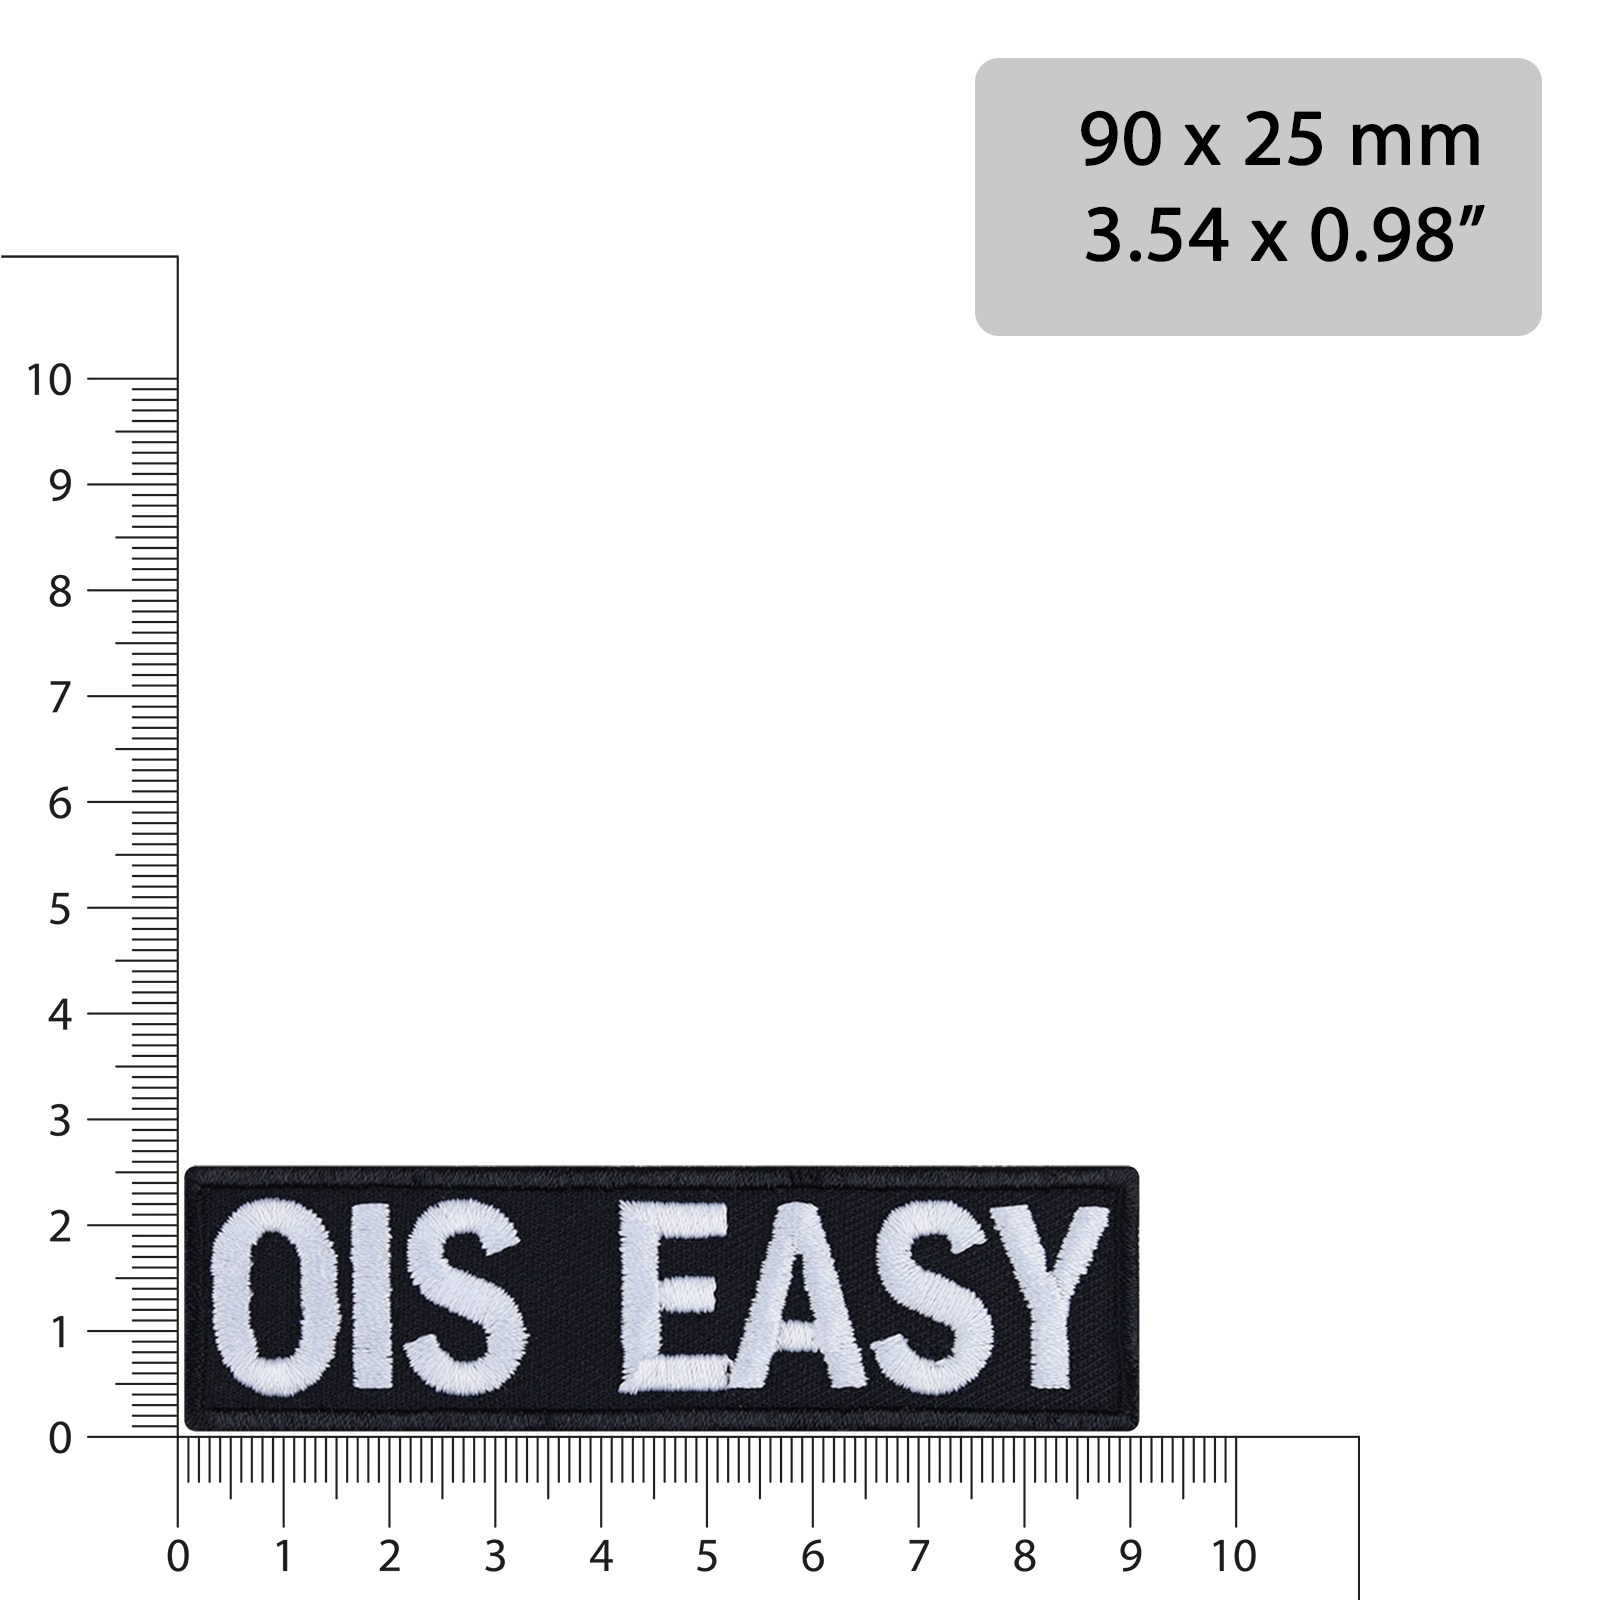 Ois easy - Patch